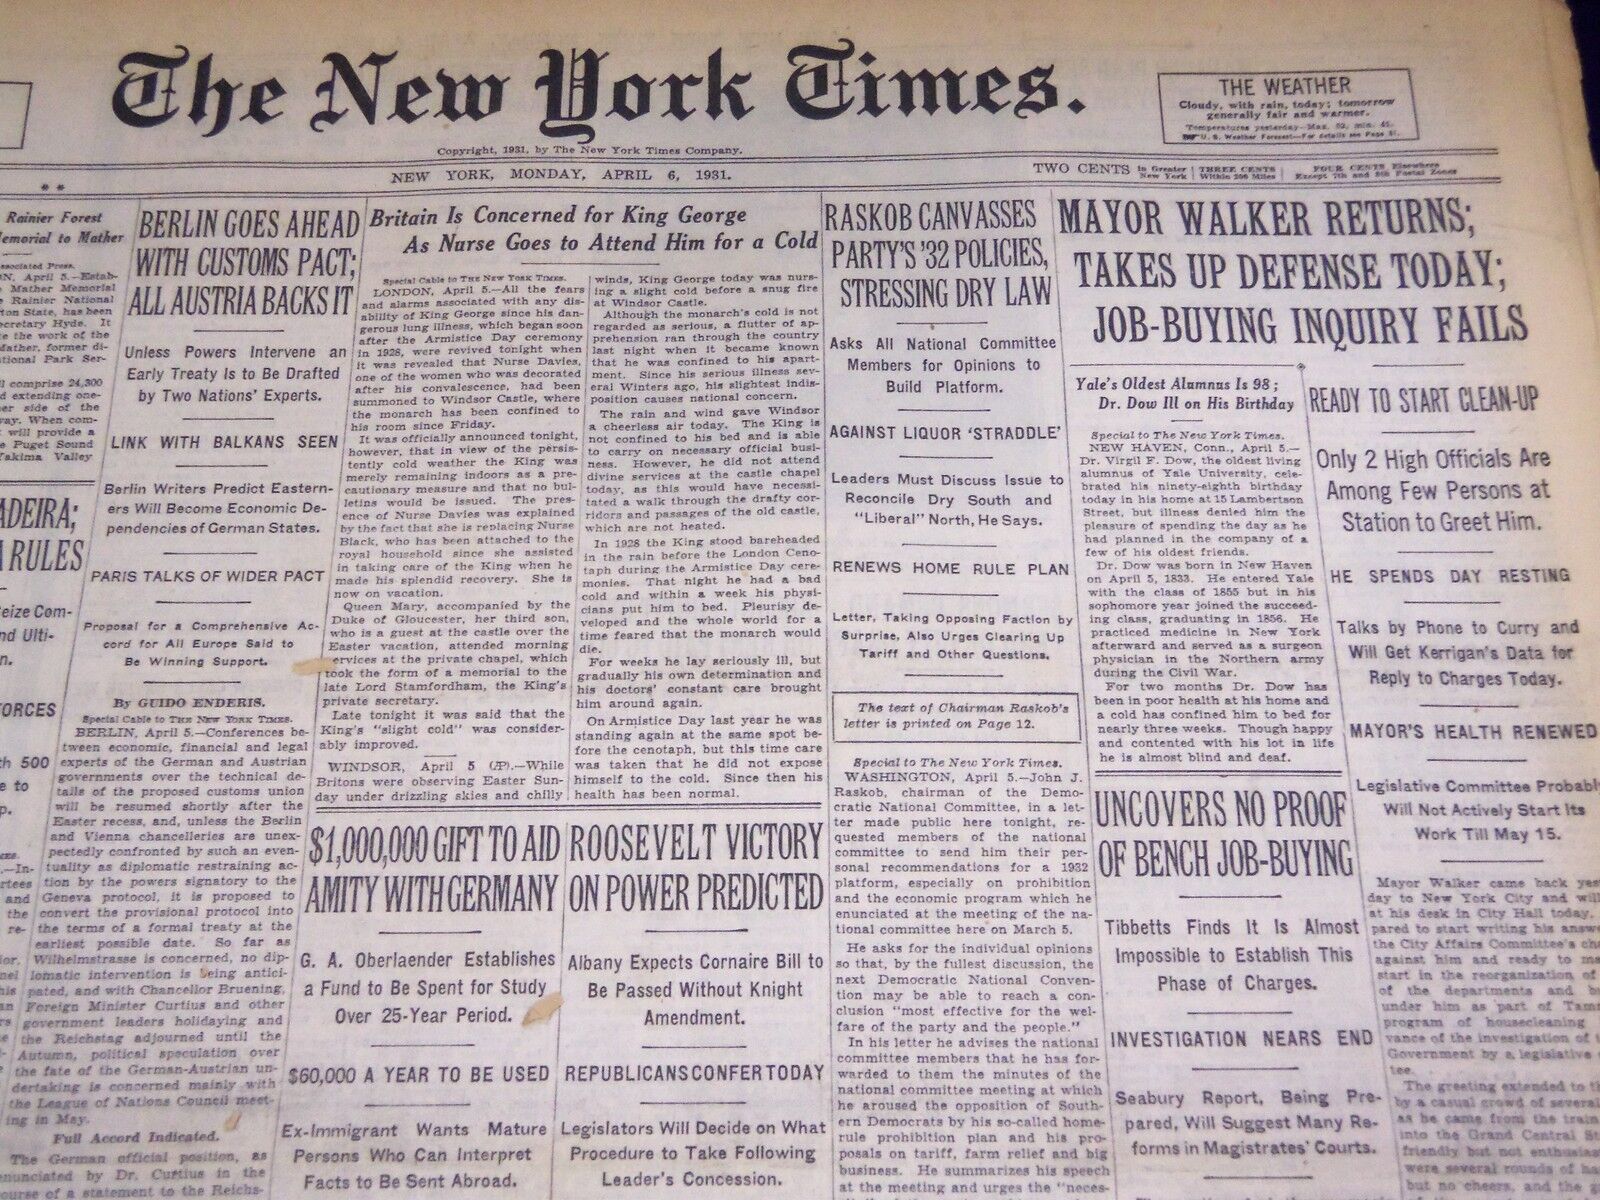 1931 APRIL 6 NEW YORK TIMES - MAYOR WALKER RETURNS TO CLEAN-UP - NT 2221